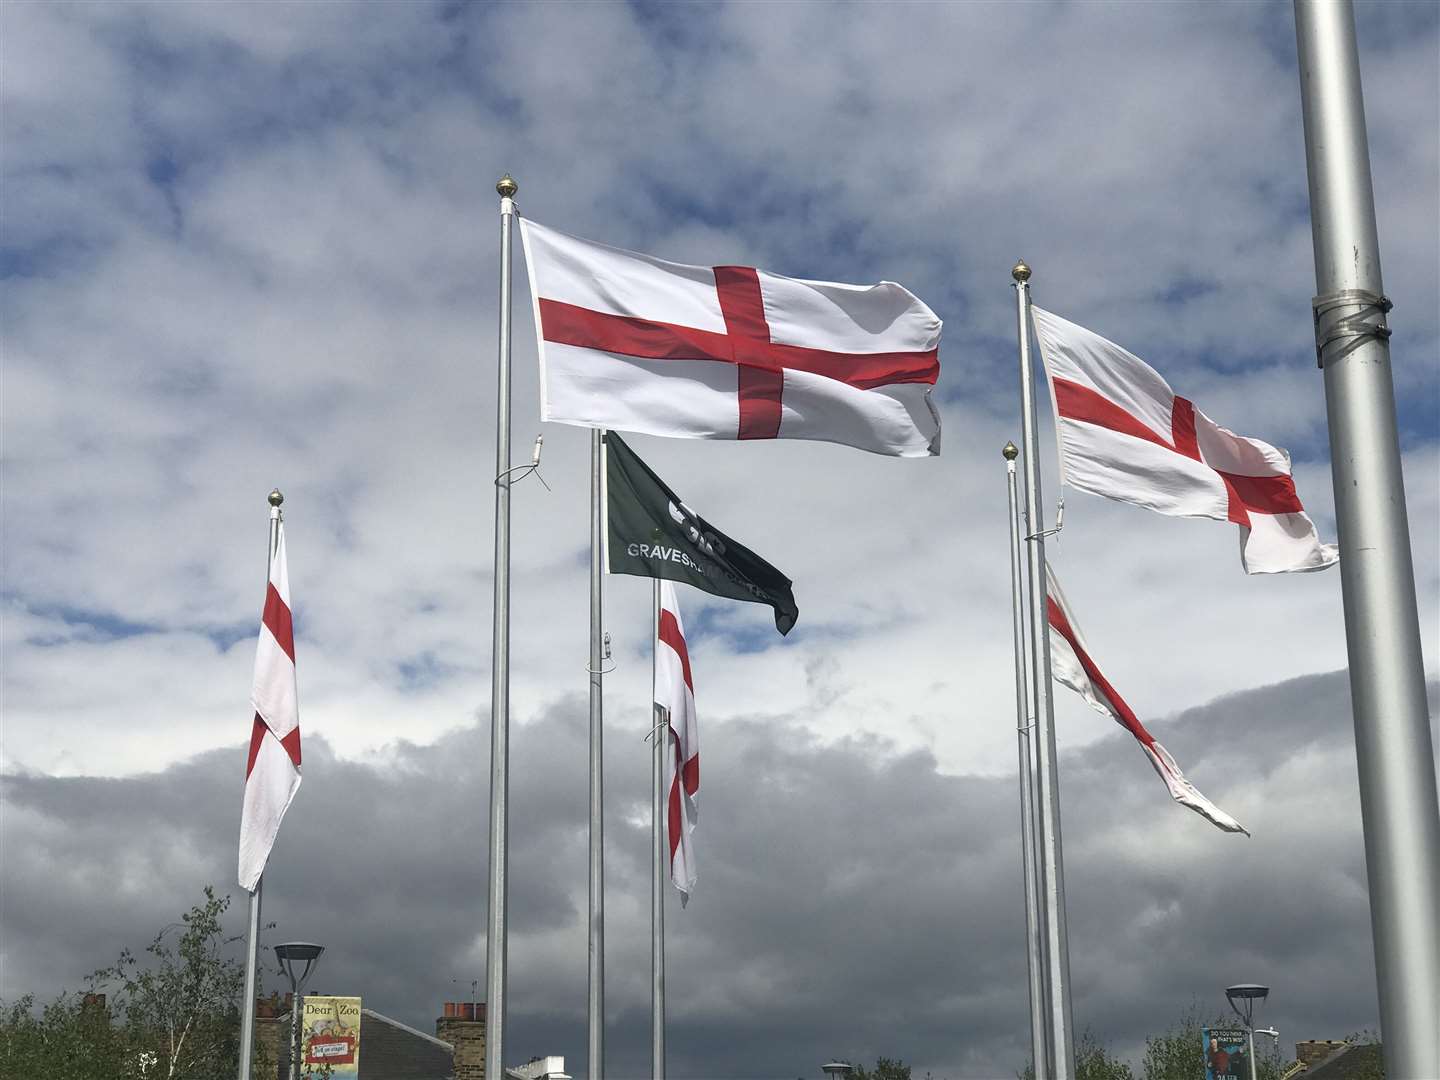 The Gravesend and Dartford St George's Day celebration has been cancelled